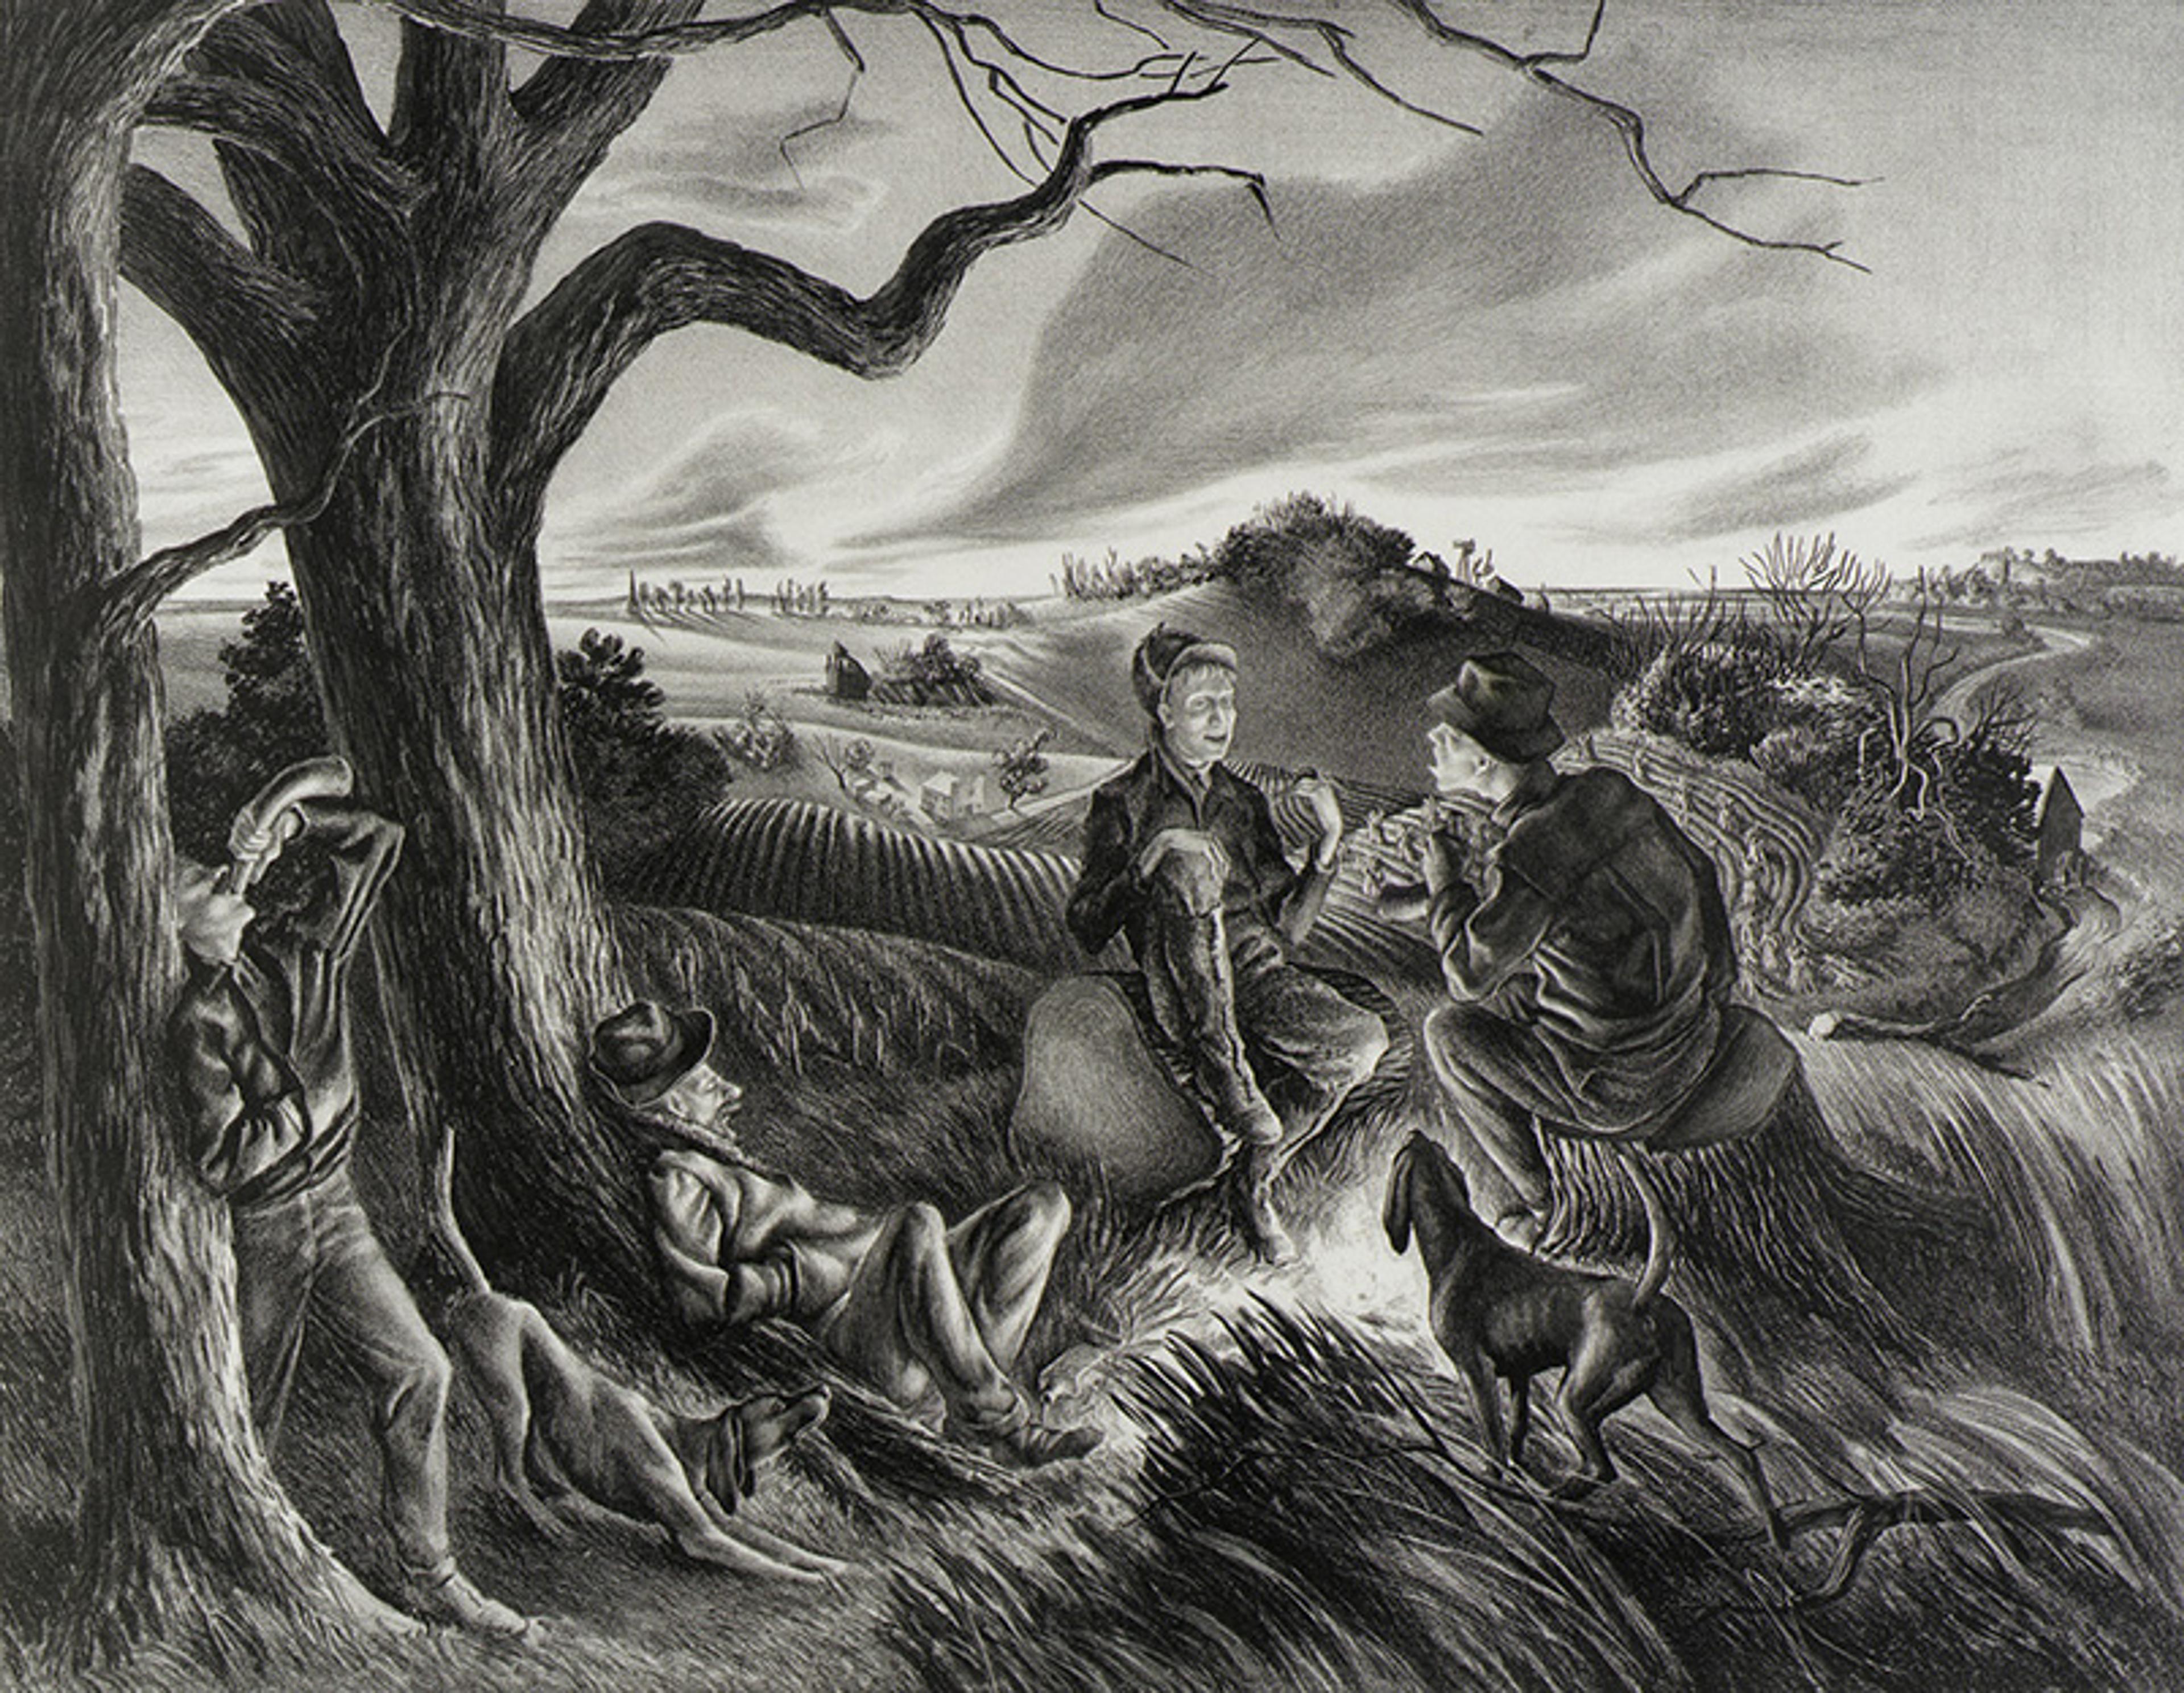 Four men and two dogs converse at a tree by a field, surrounded by a vast rural landscape on a cloudy day.